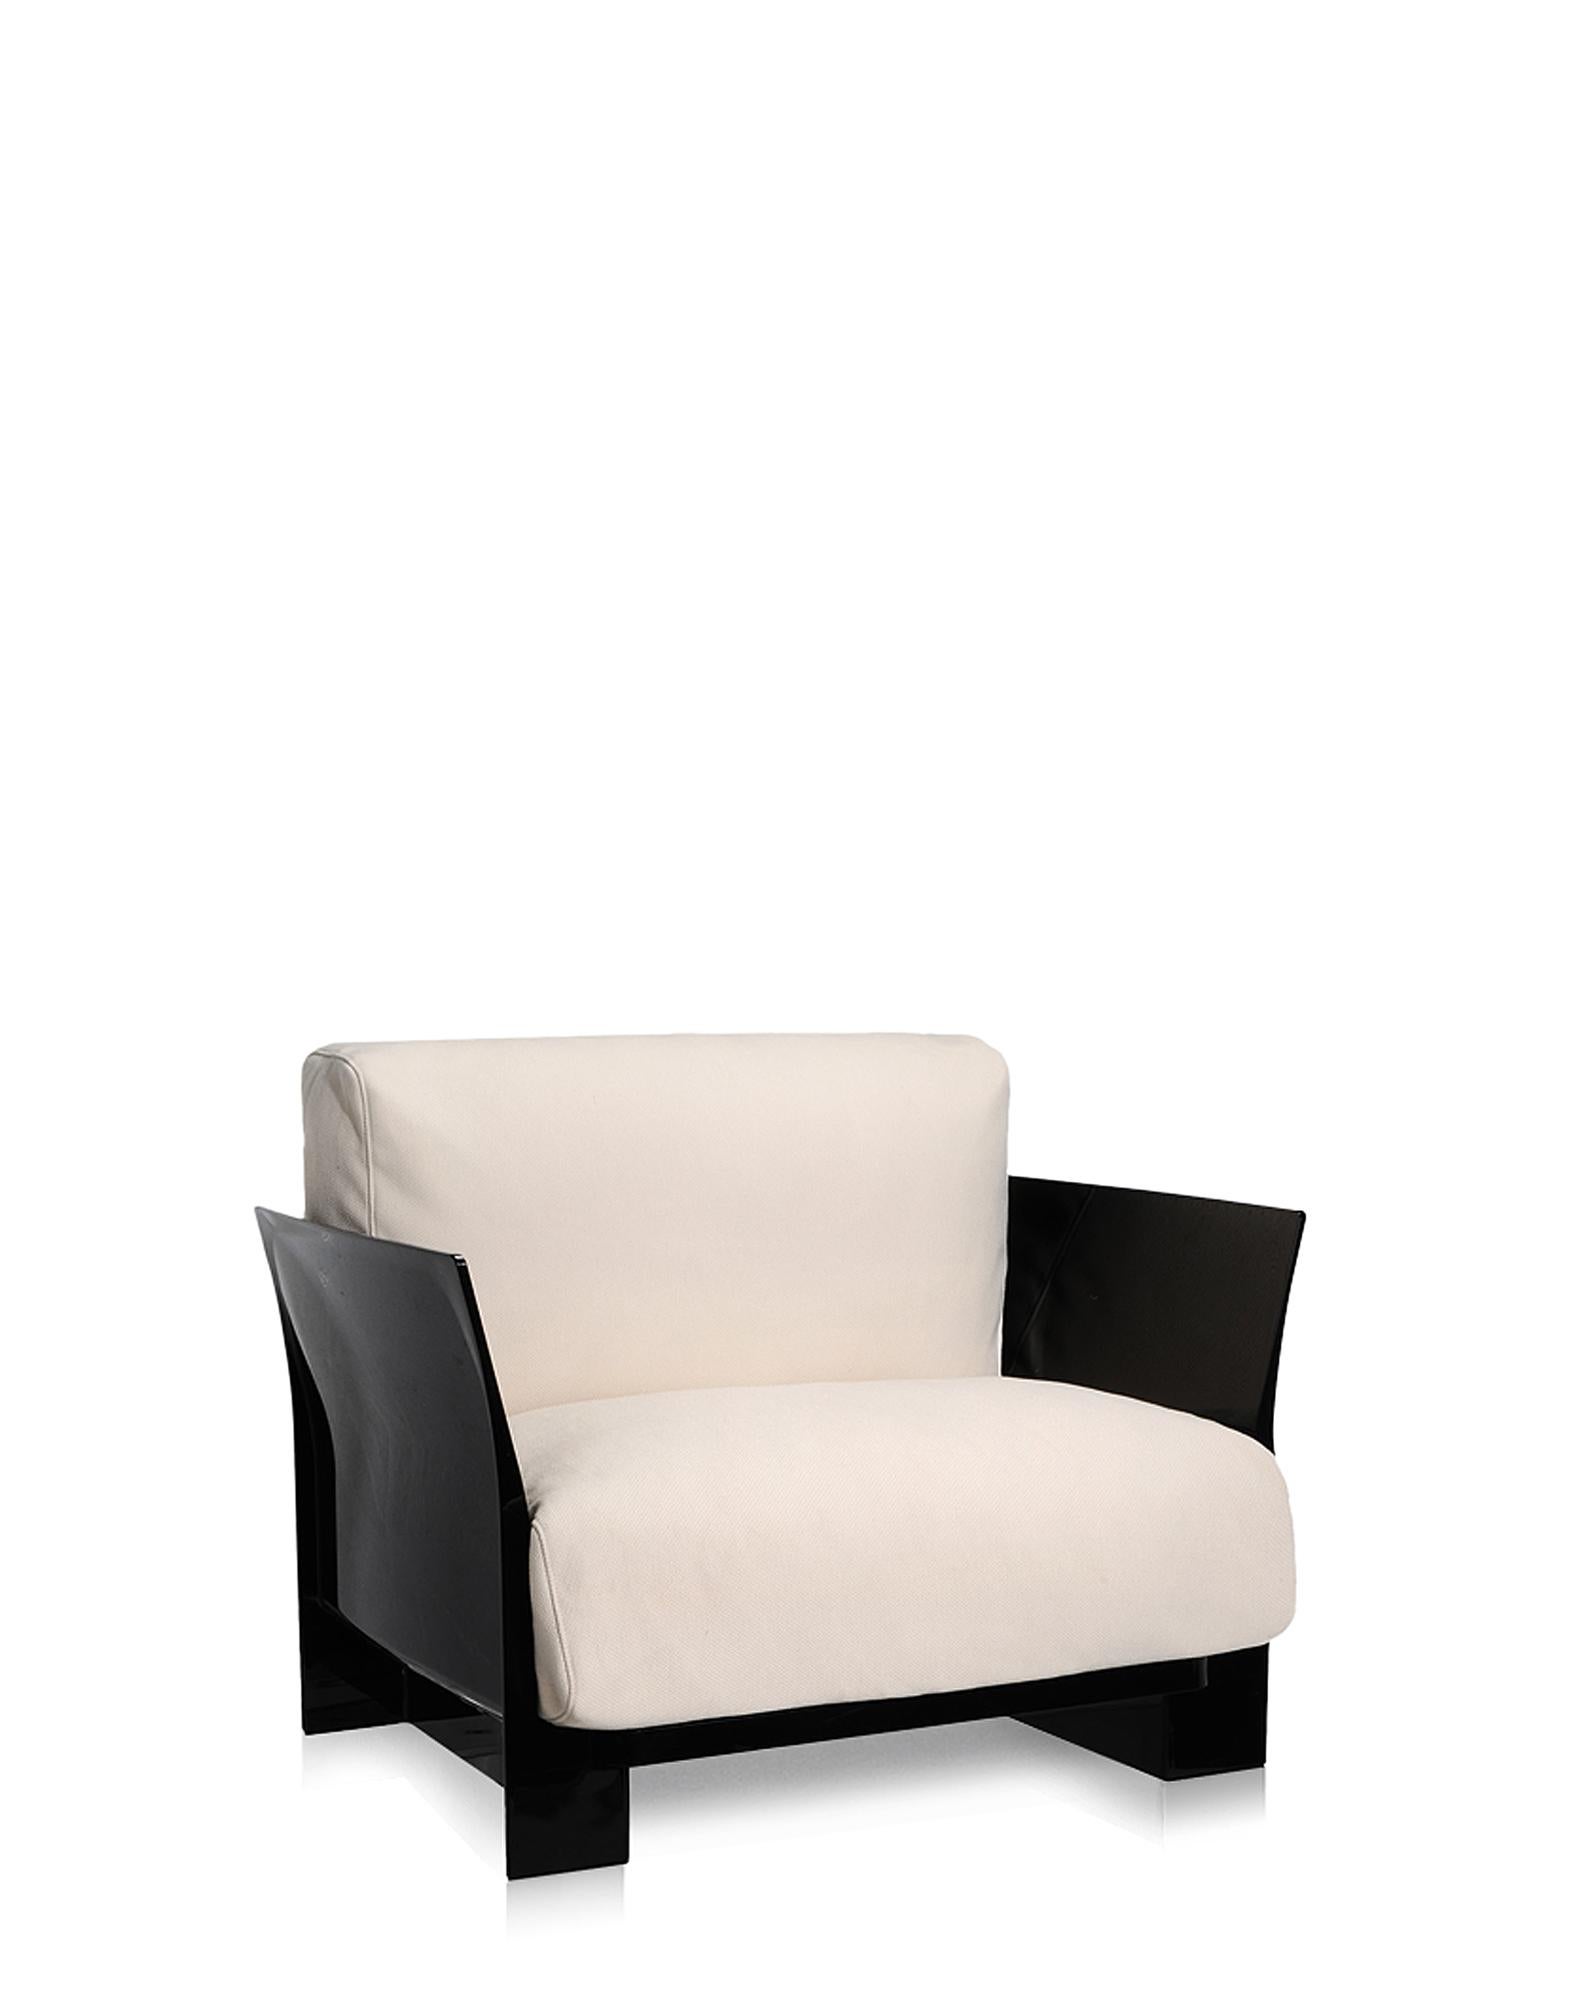 Contemporary Kartell Pop Outdoor Armchair in Ecru by Piero Lissoni For Sale